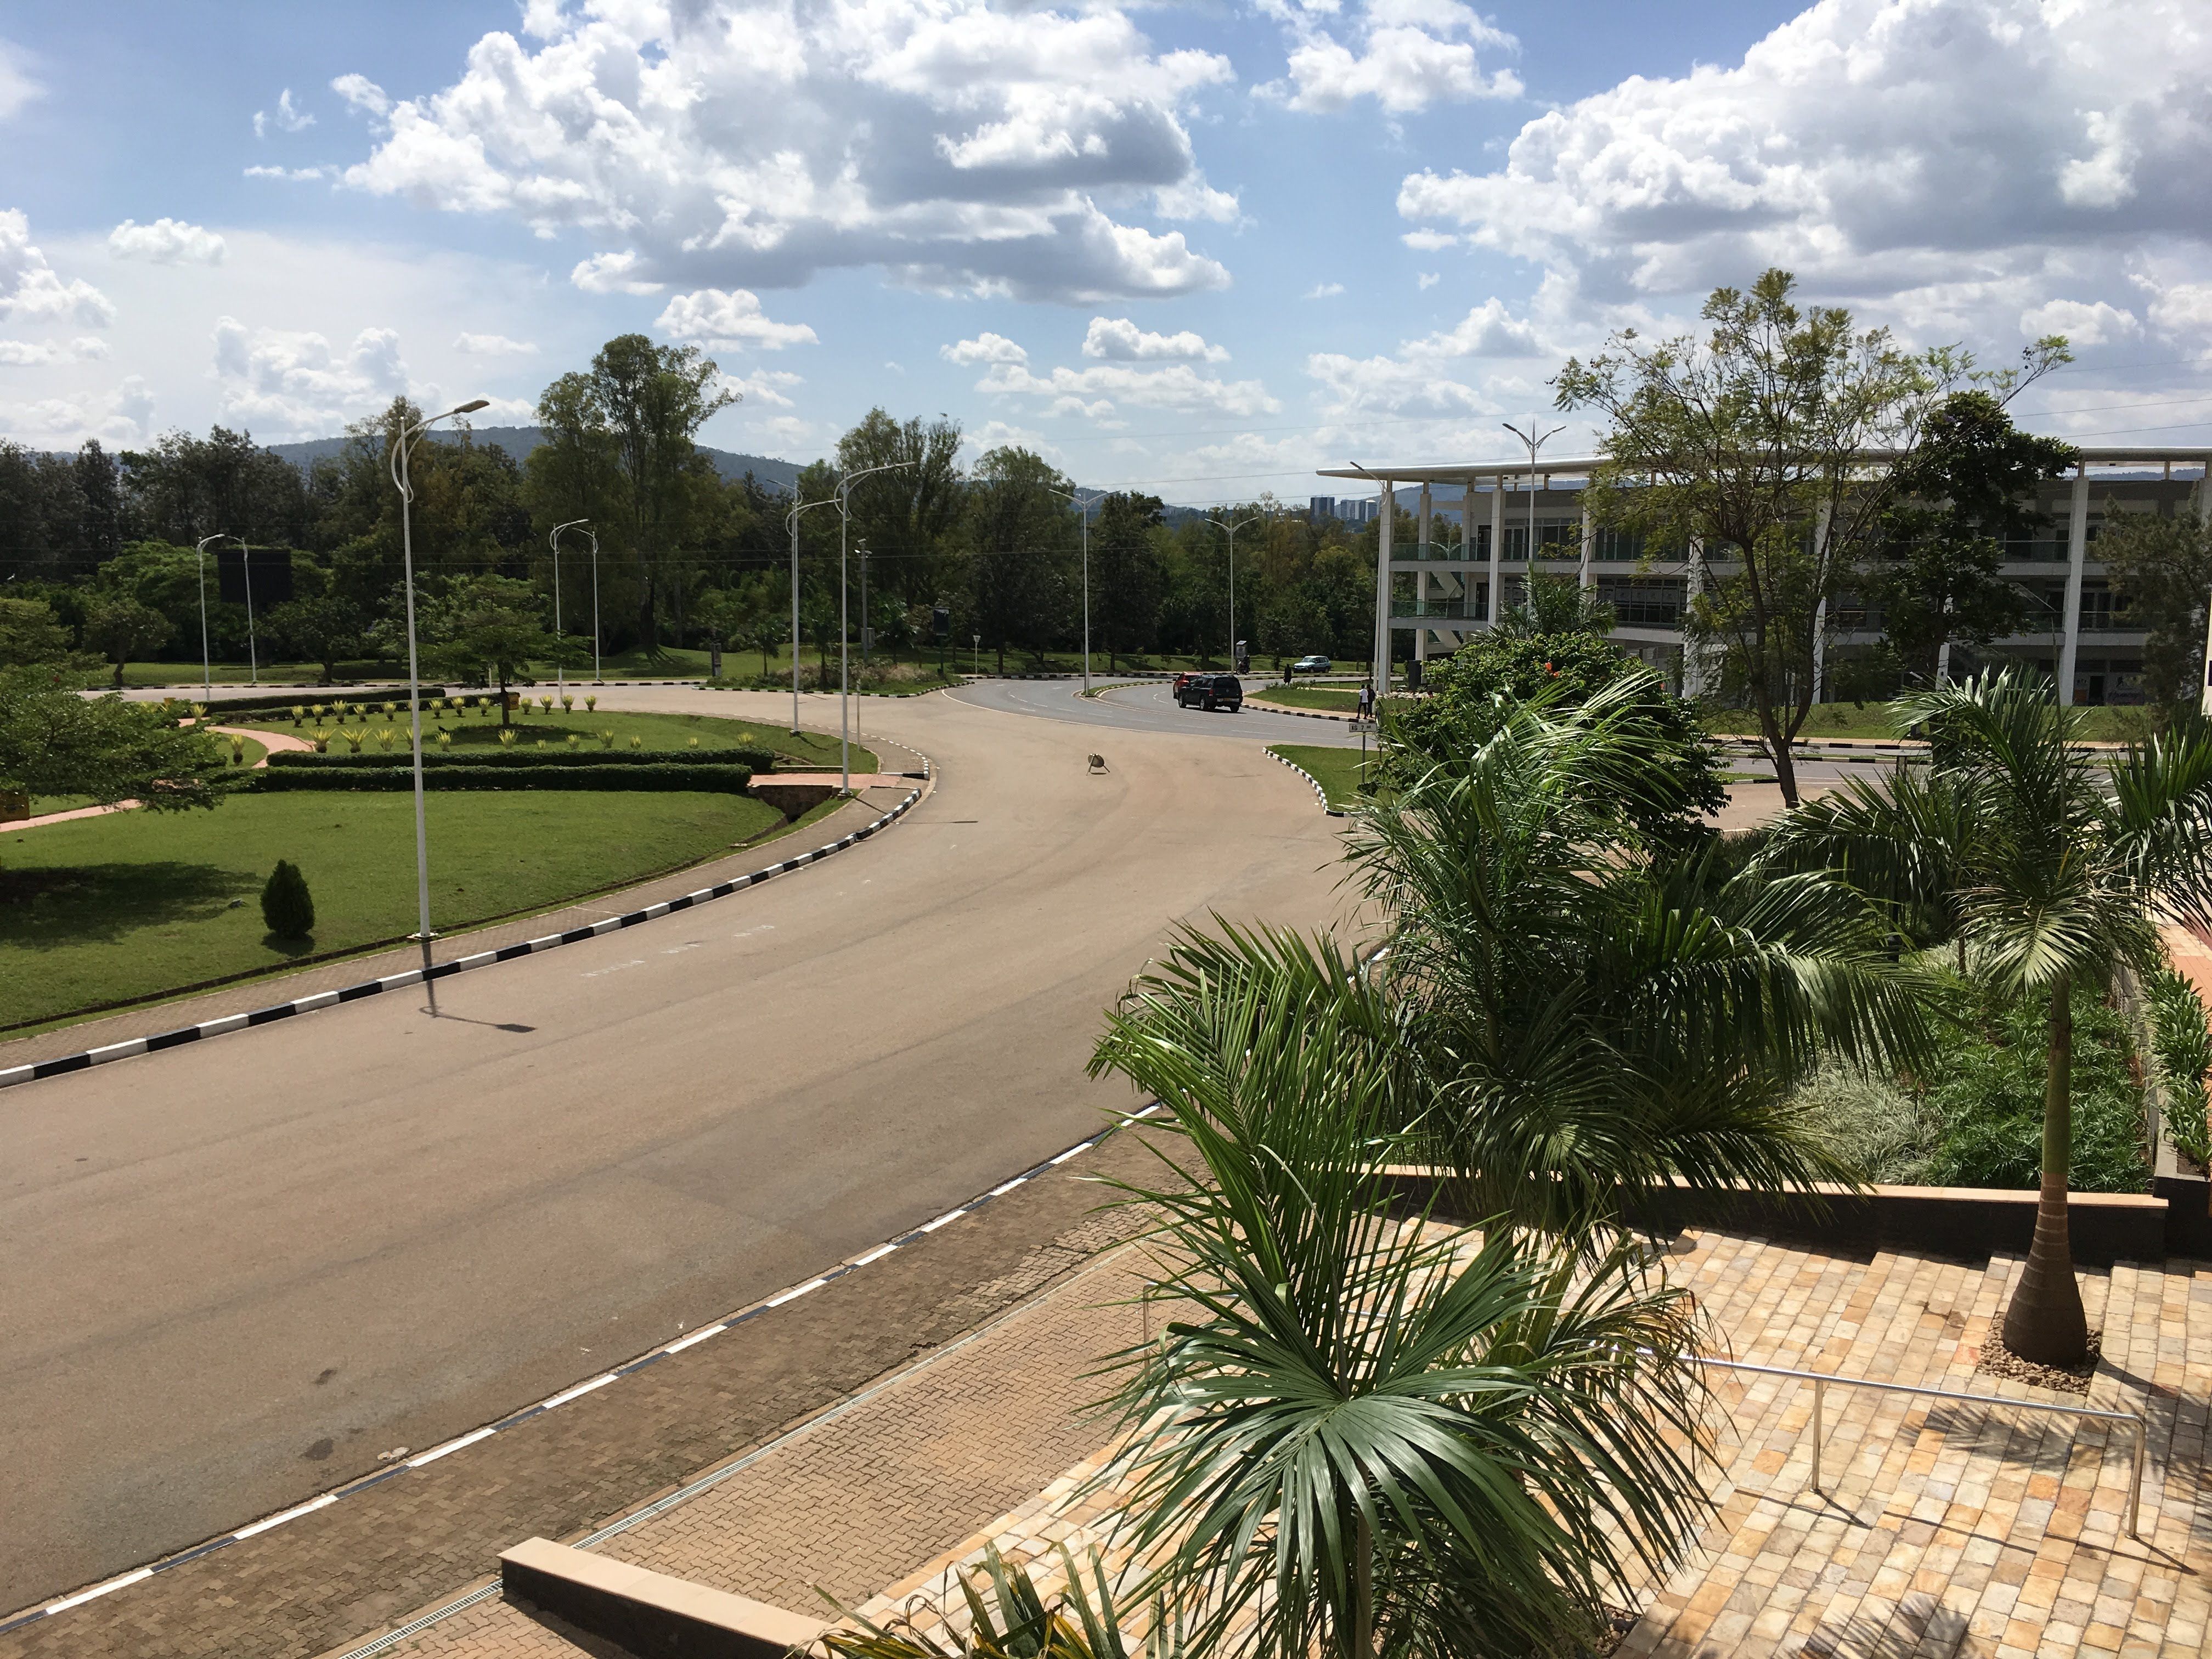 A view from A building on the side of Kigali Car free day route